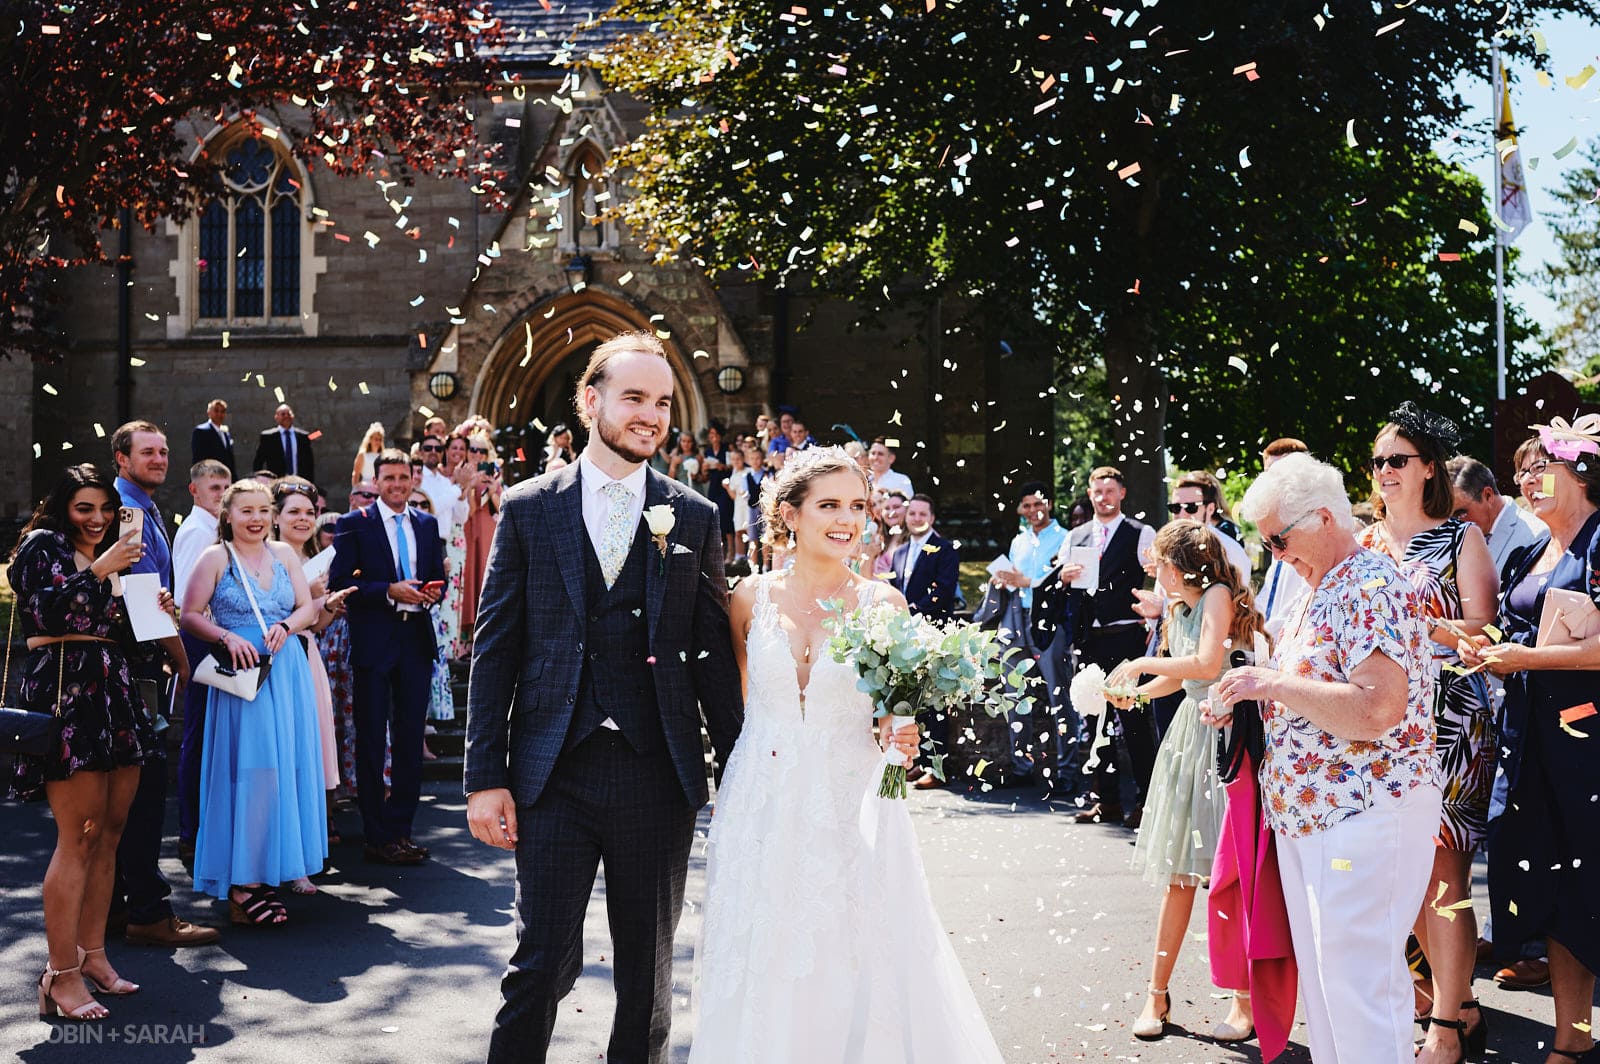 Wedding guests throw confetti over bride and groom at St Peter's Catholic church Bromsgrove